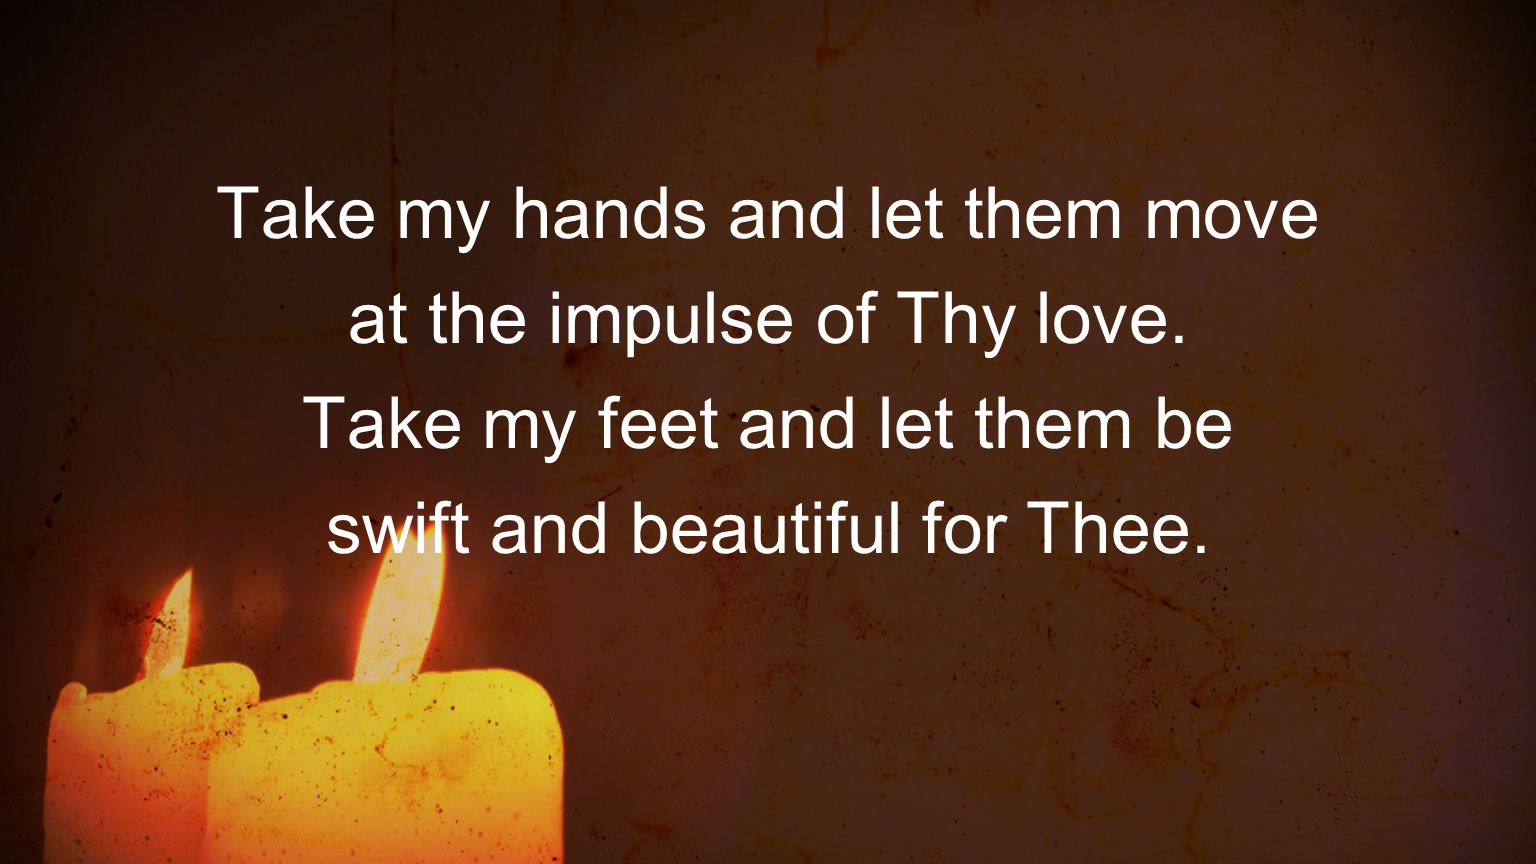 Take my hands and let them move at the impulse of Thy love.